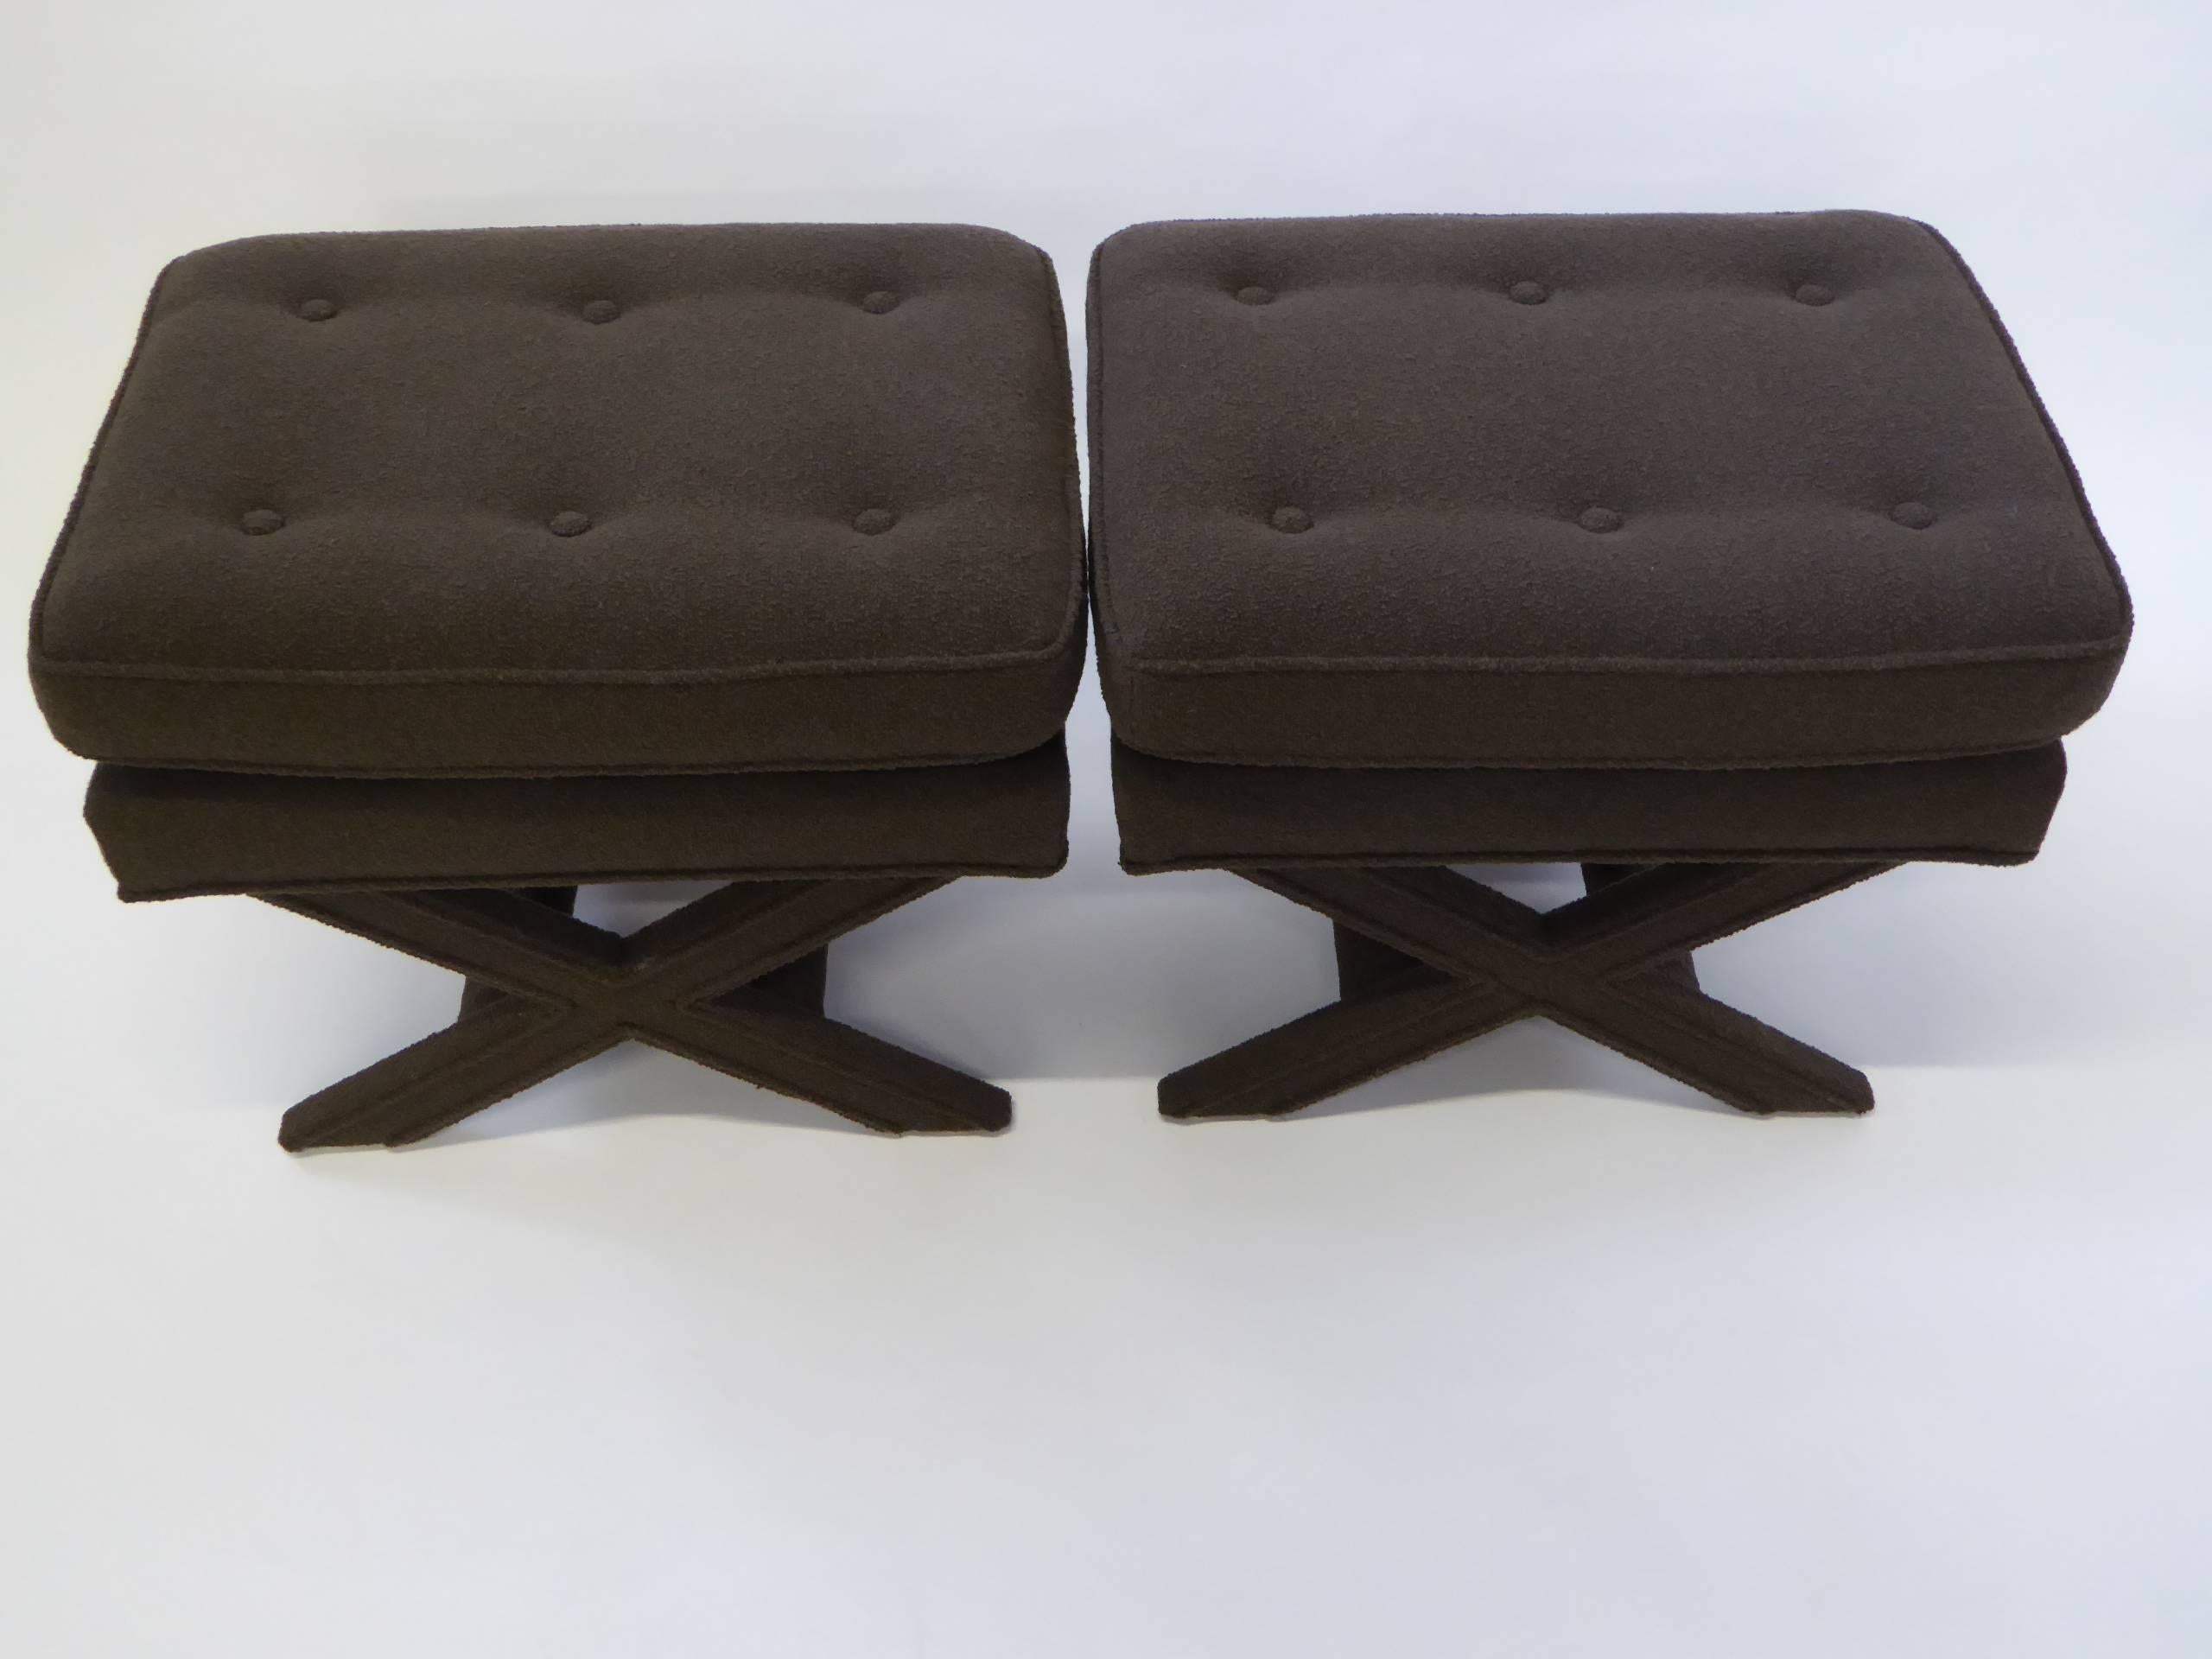 Button tufted and in a warm dark cocoa bouclé fabric, this pair of Billy Baldwin style X-benches are quite urbane and sophisticated. Great welting detail in legs and all around. At the end of the bed, side by side at the cocktail table. Price is for